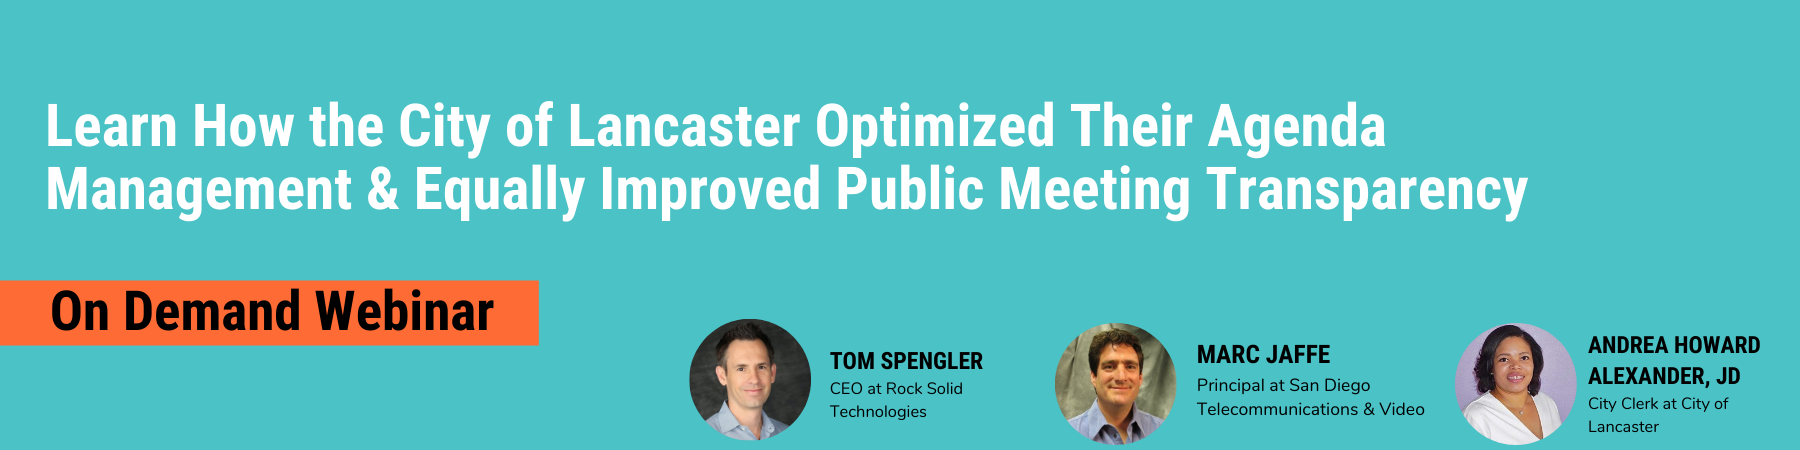 On demand webinar: Learn how the city of Lancaster optimized their agenda management and equally improved public meeting transparency.